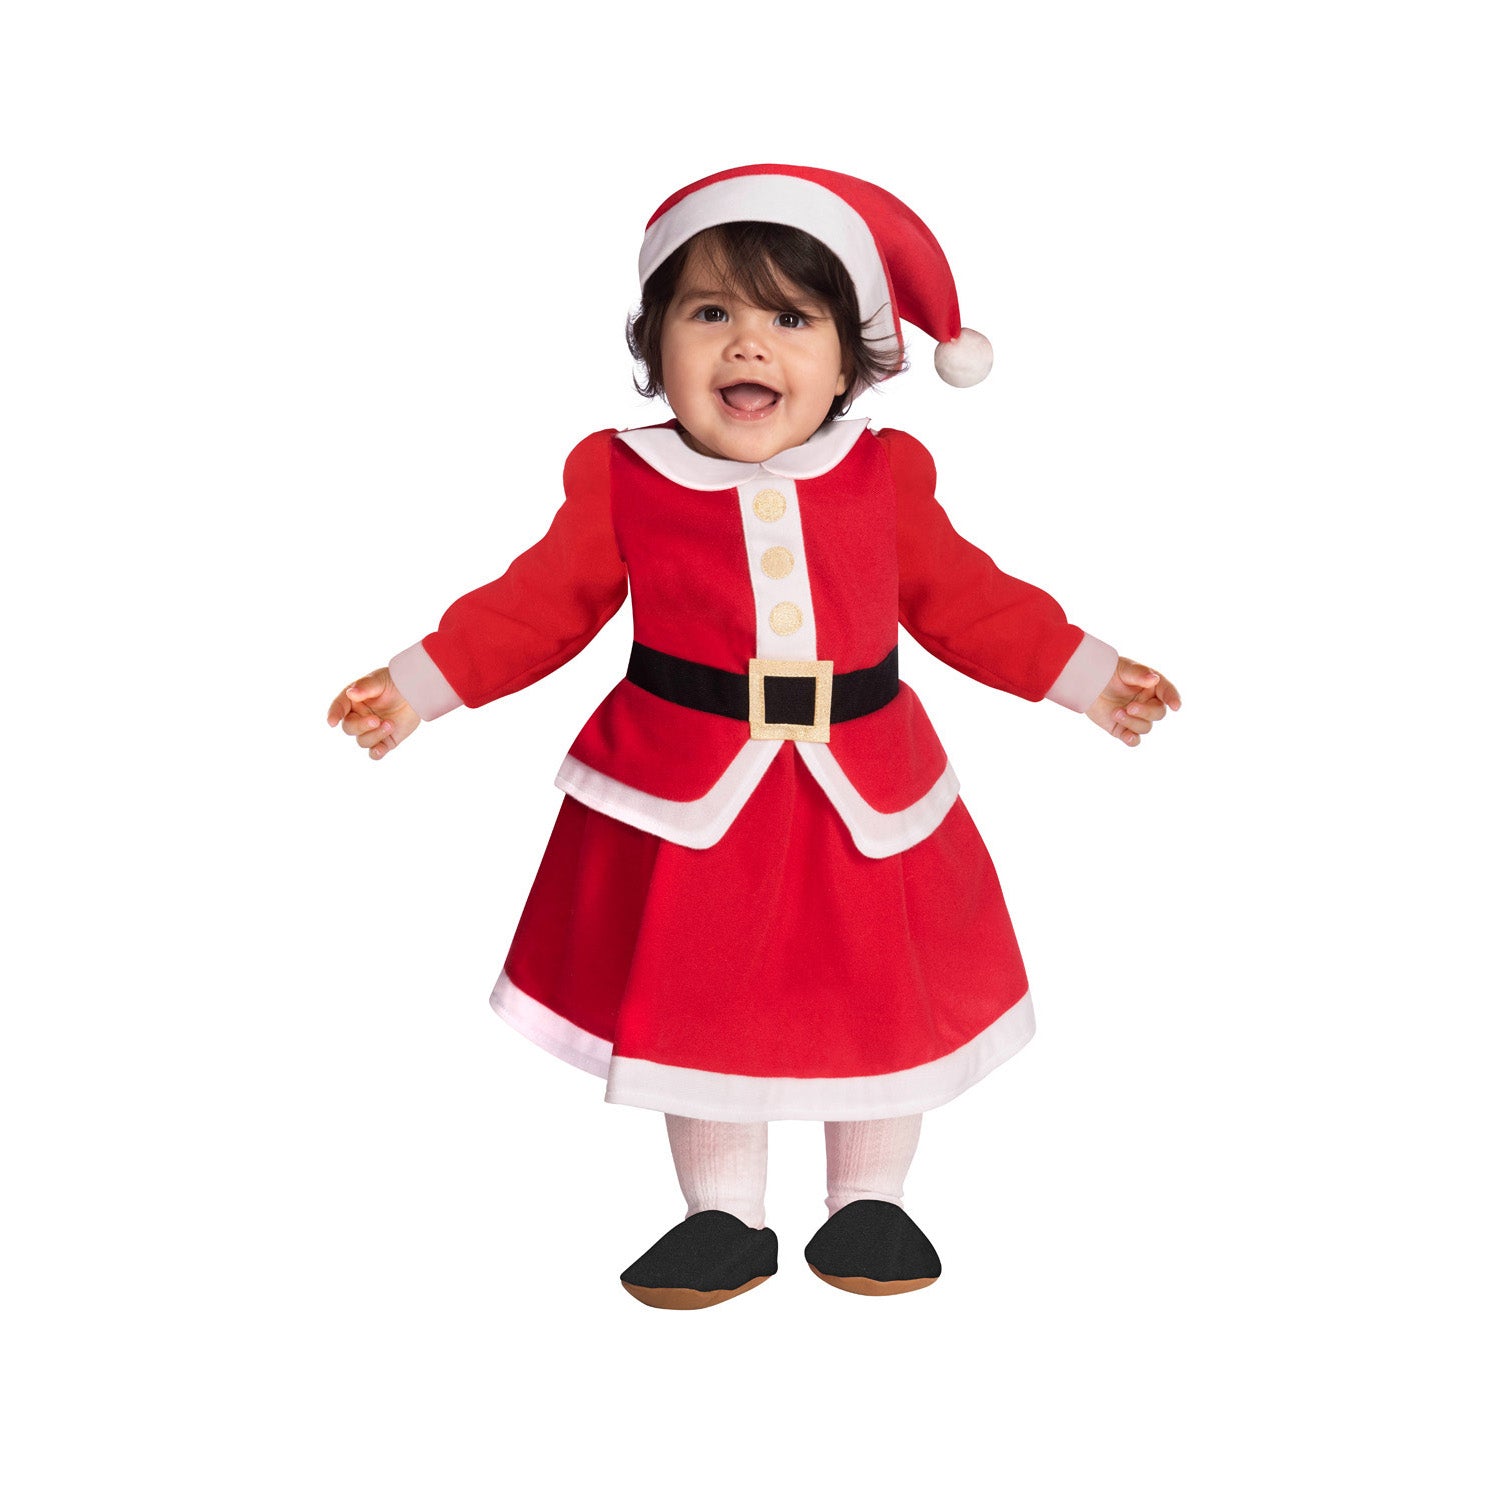 Costume for Miss Santa 6-12 months Baby Costume Little Miss Santa Age 6 - 12 Months